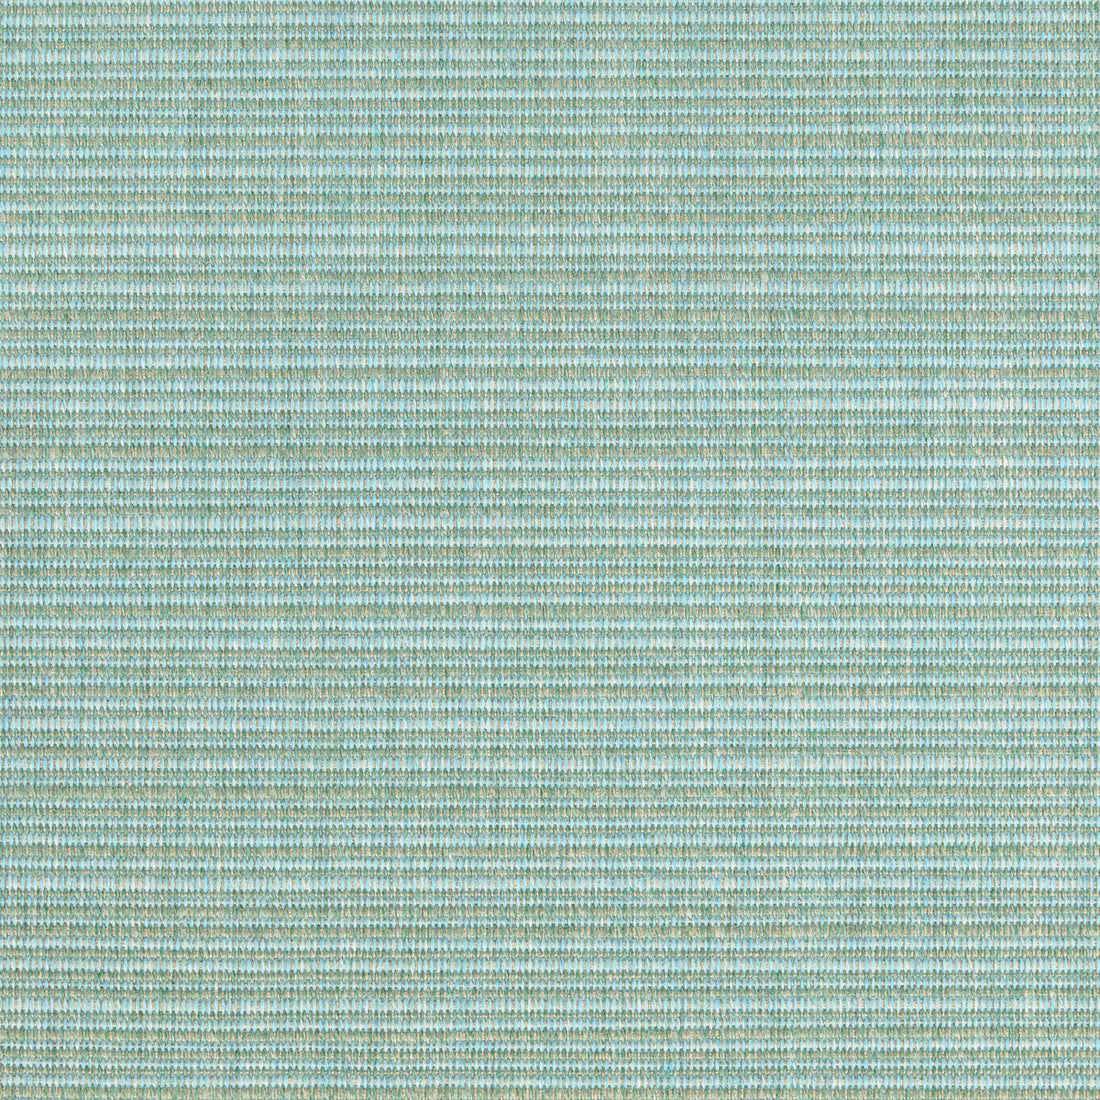 Kravet Basics fabric in 36842-153 color - pattern 36842.153.0 - by Kravet Basics in the Indoor / Outdoor collection